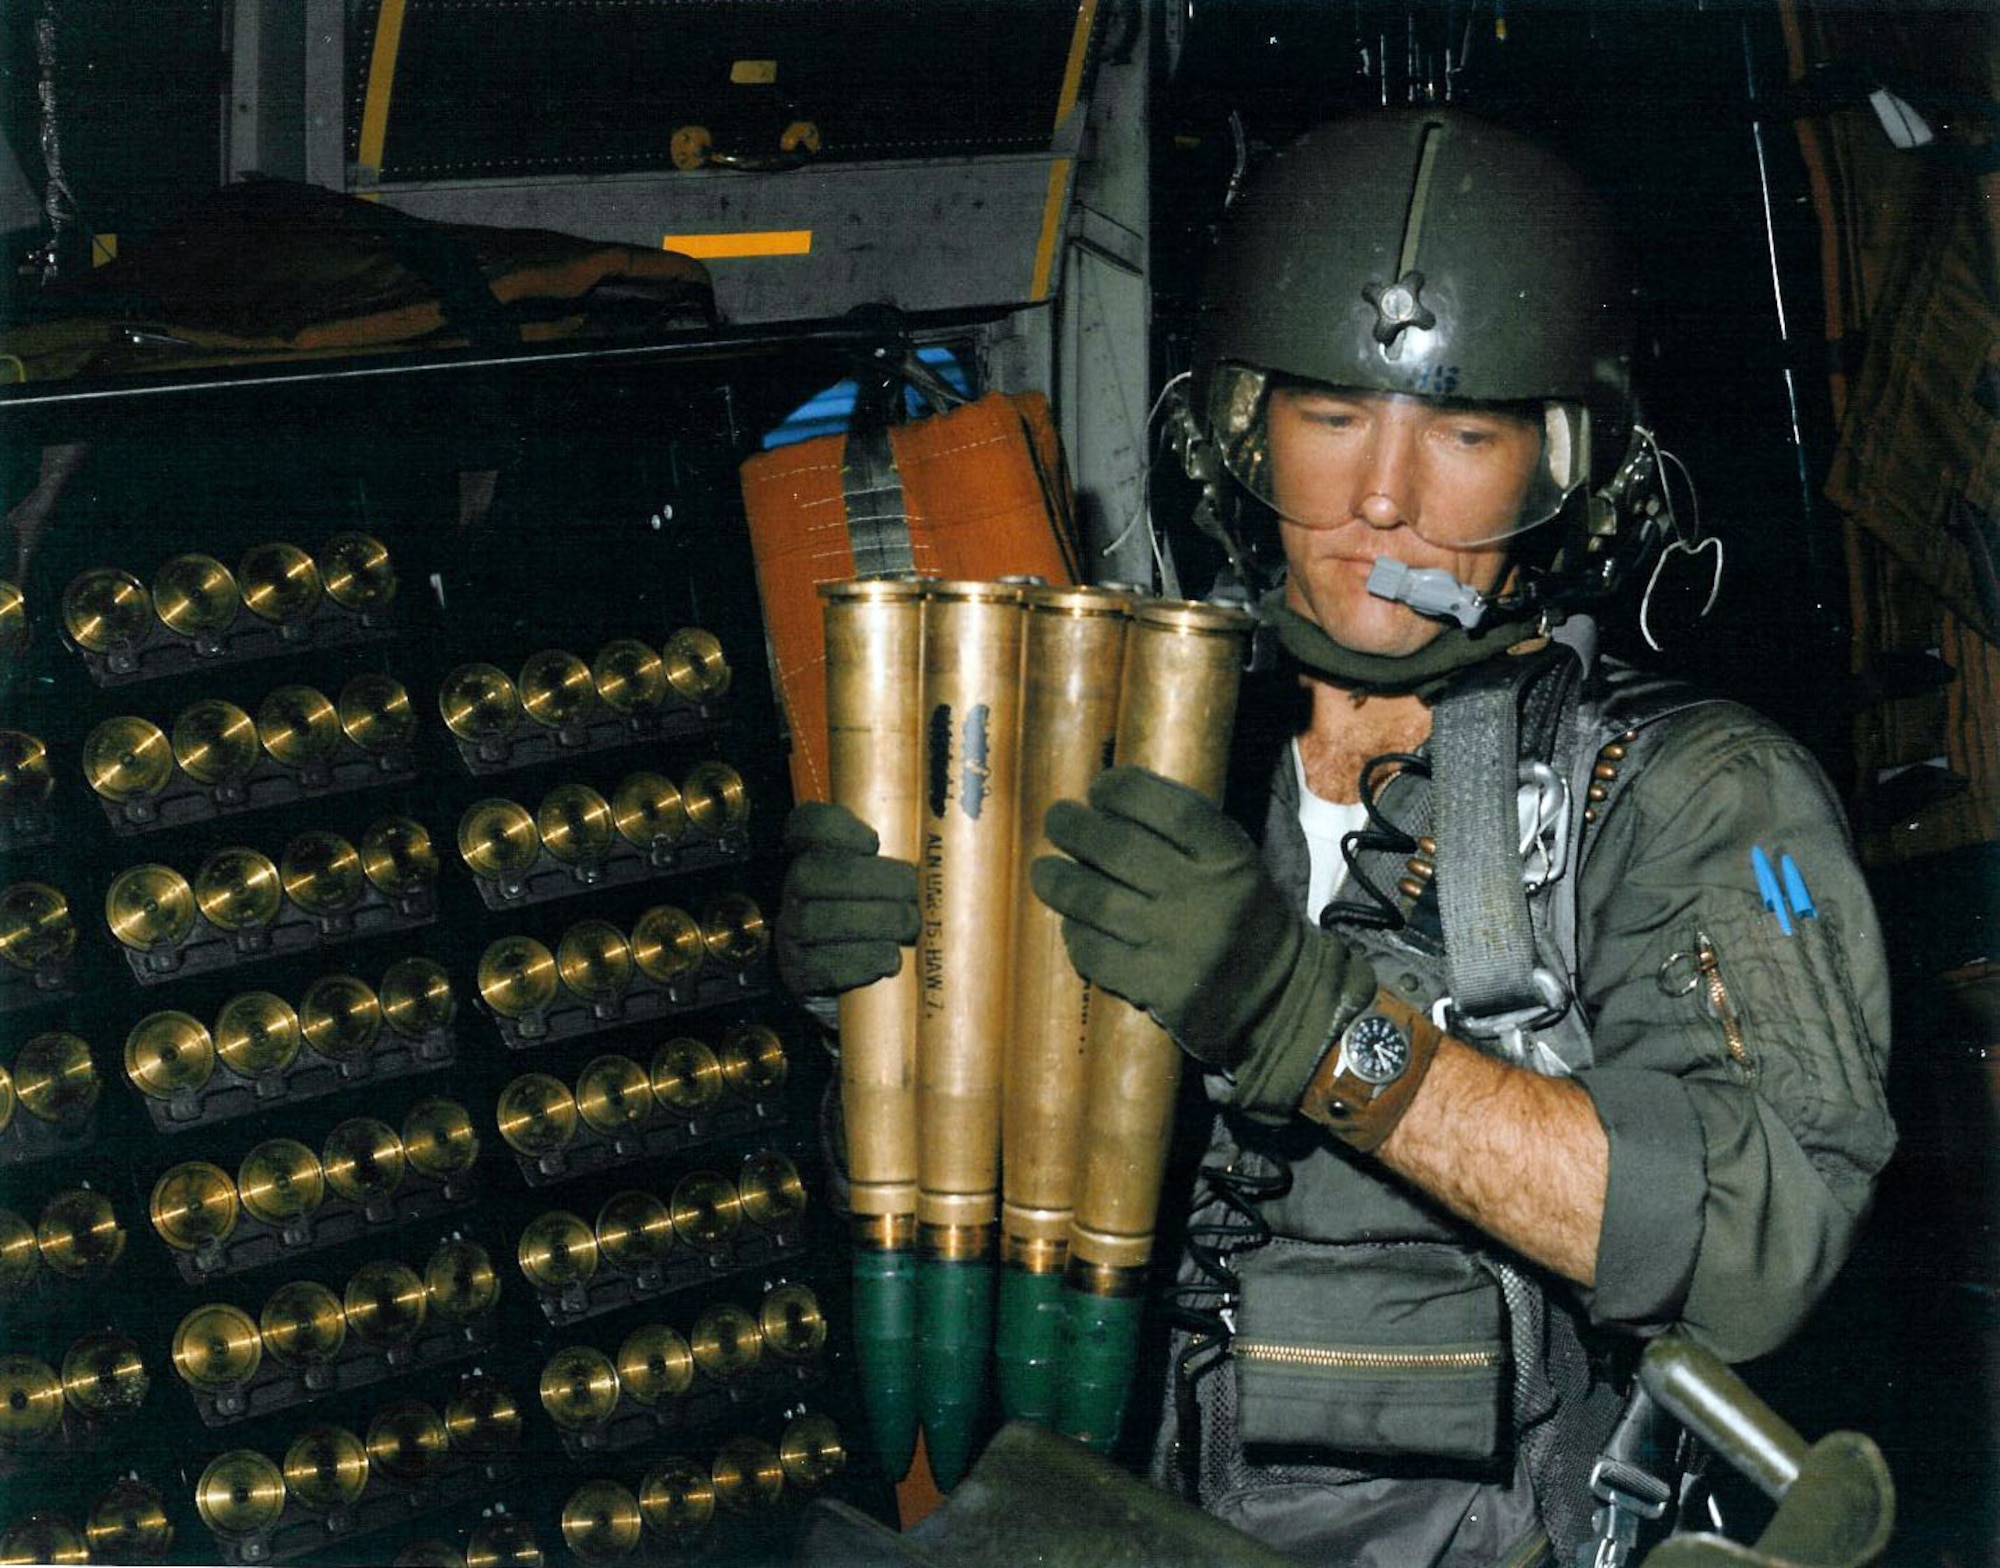 AC-130 gunner Sgt. Donald Dawson pulls out a four-round 40mm clip from the onboard storage rack. (U.S. Air Force photo)